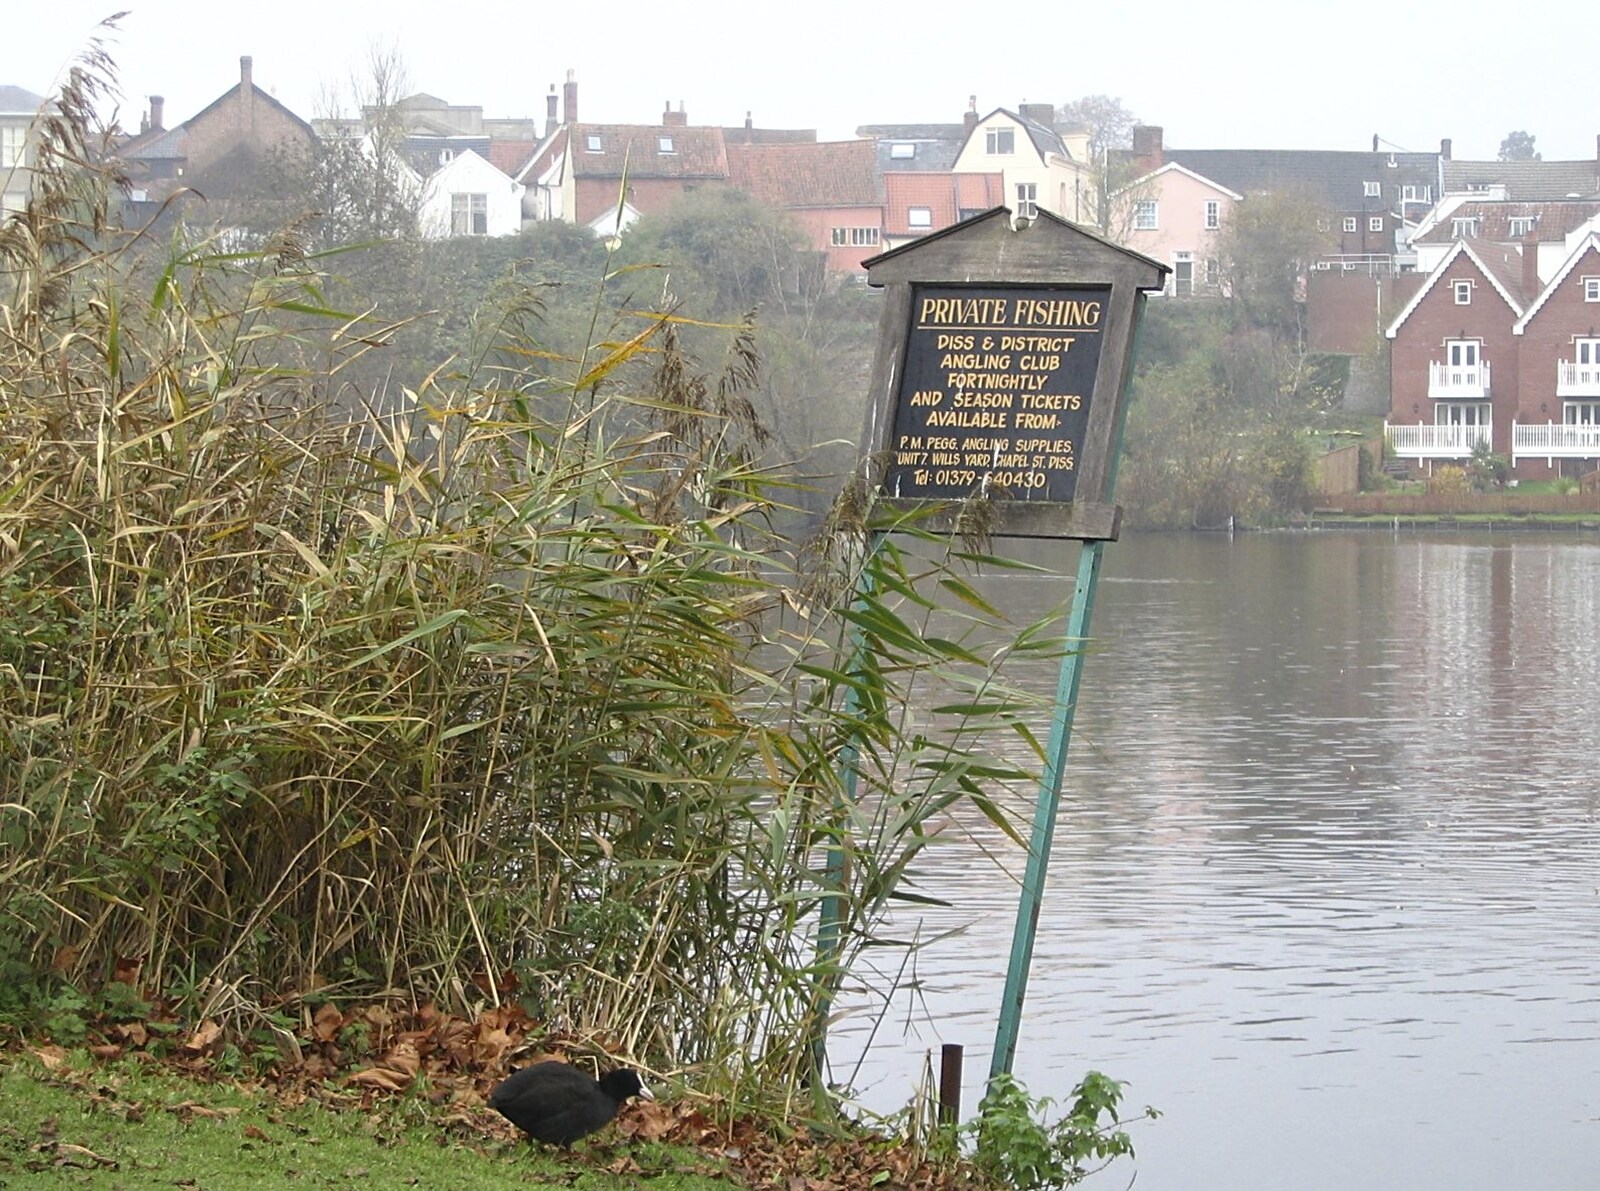 Private fishing sign from Feeding the Ducks: a Diss and Norwich Miscellany - 7th November 2004